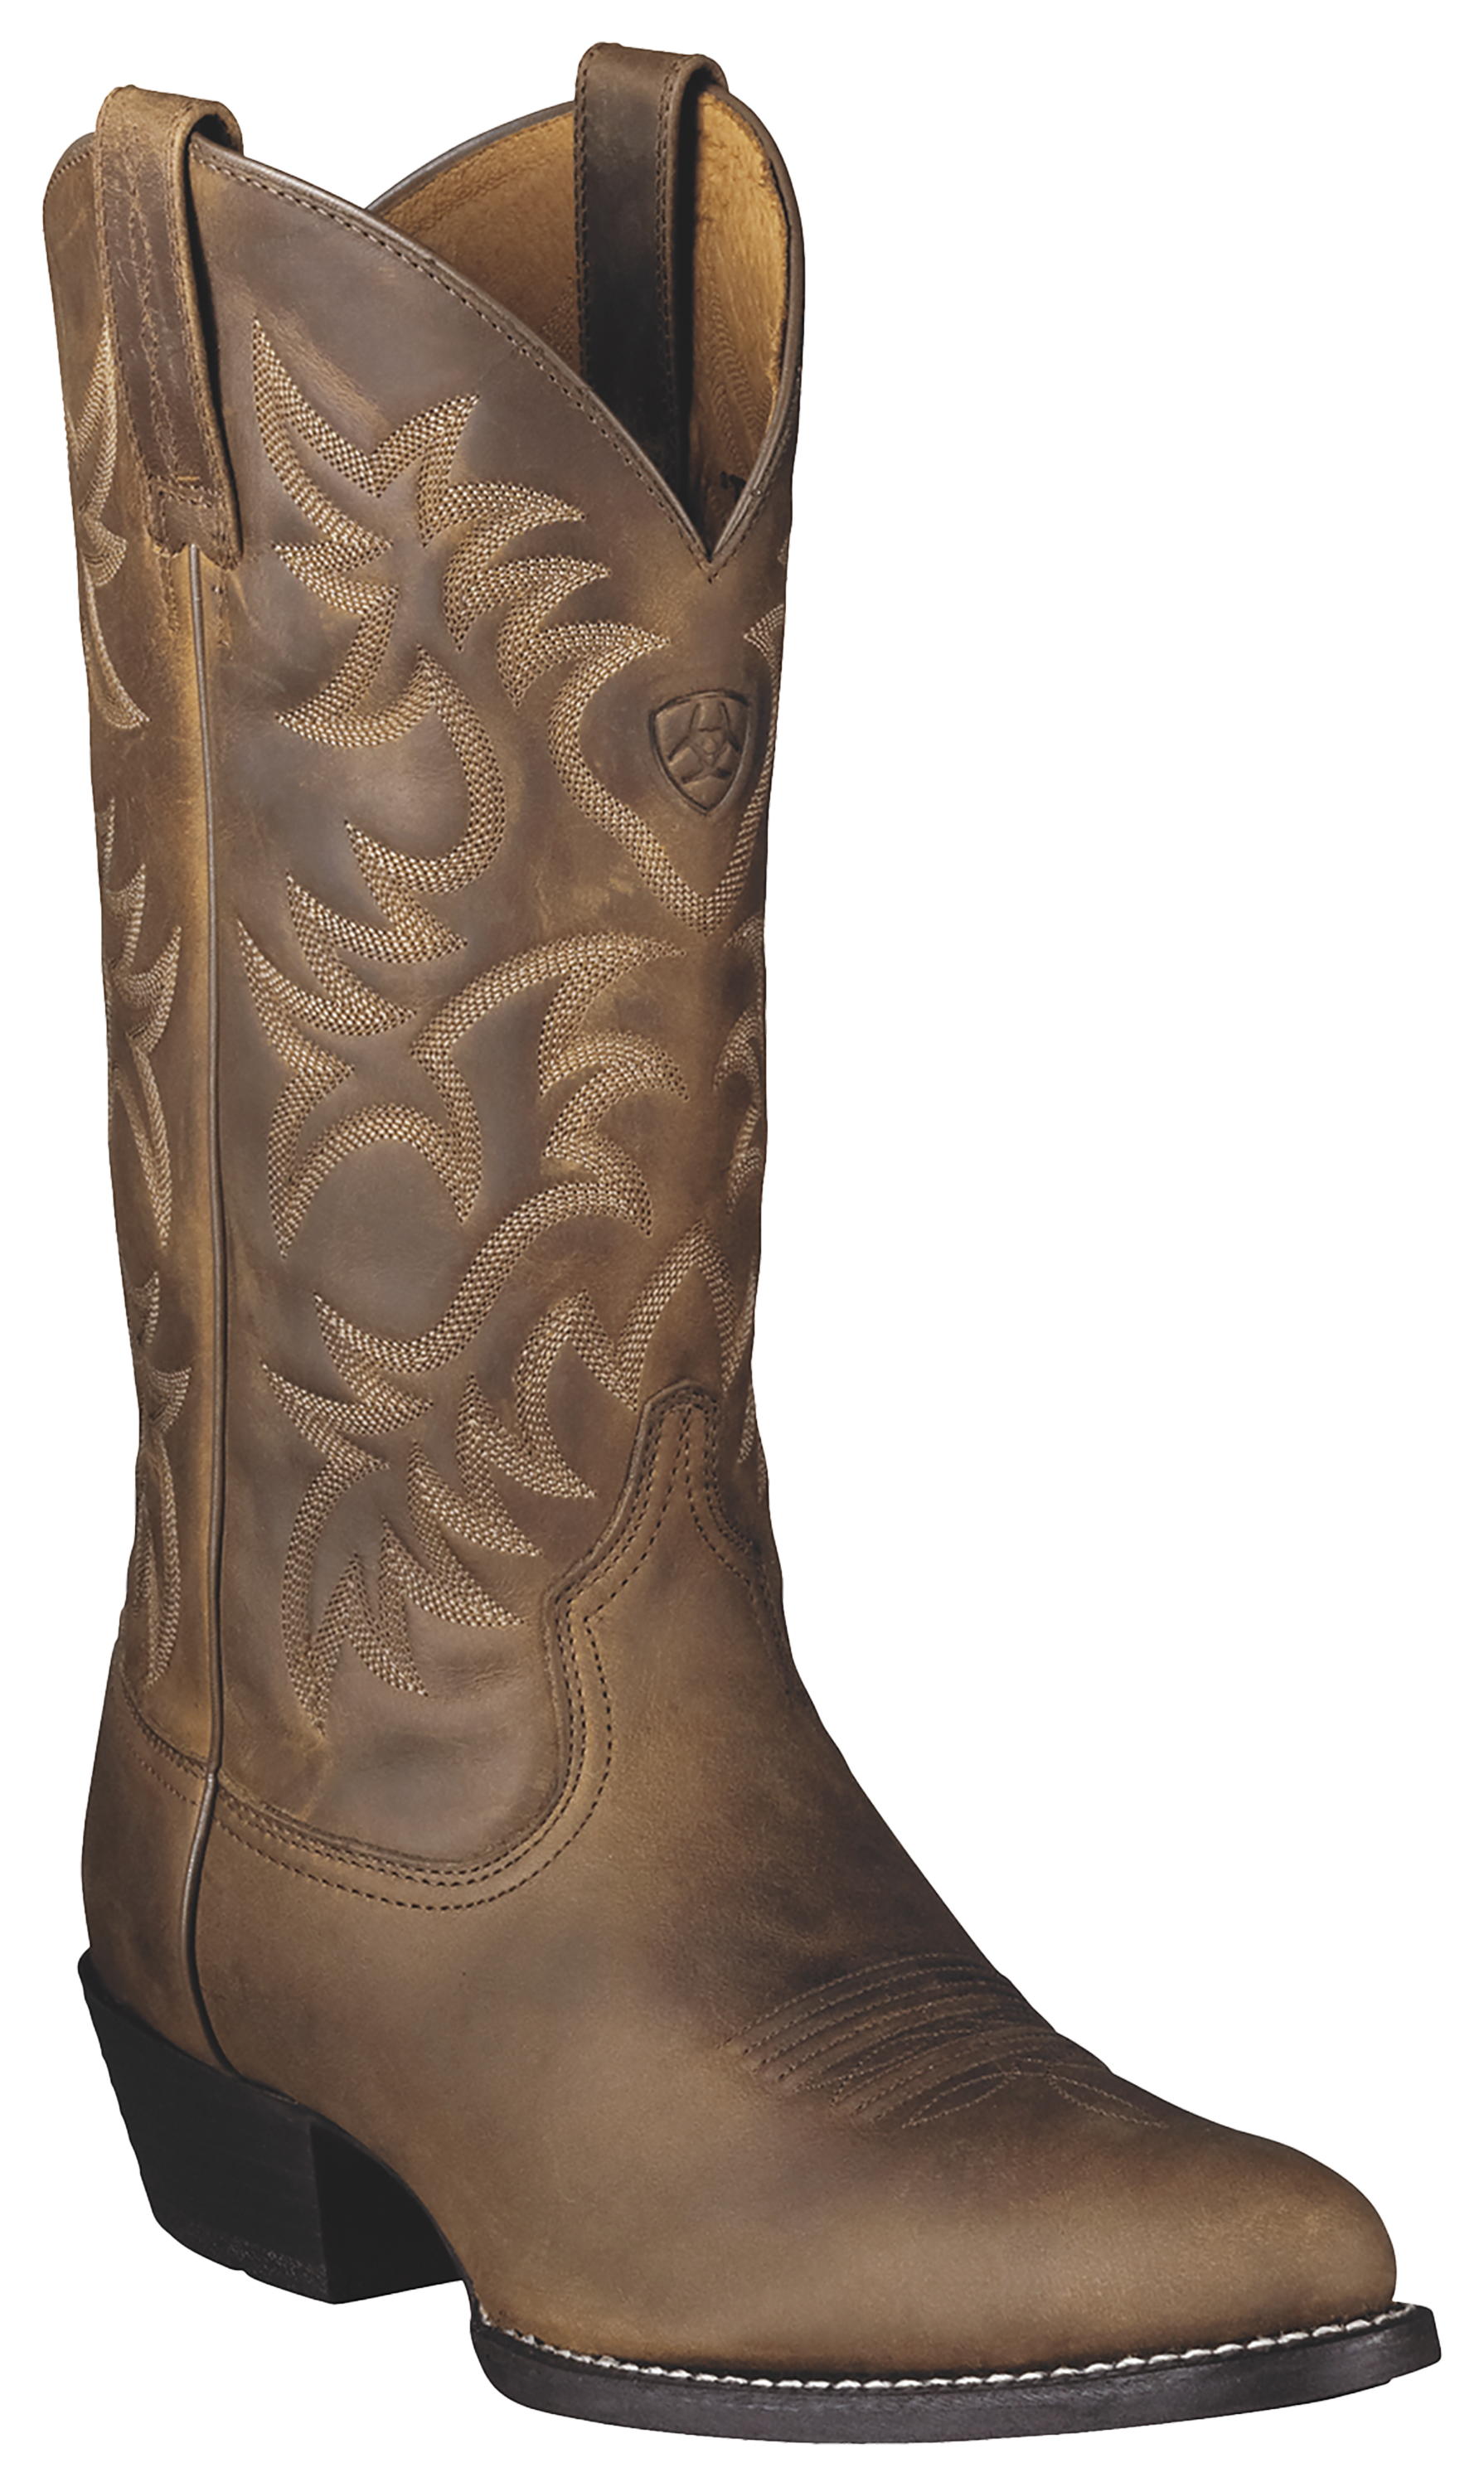 Ariat Heritage Western R-Toe Cowboy Boots for Men